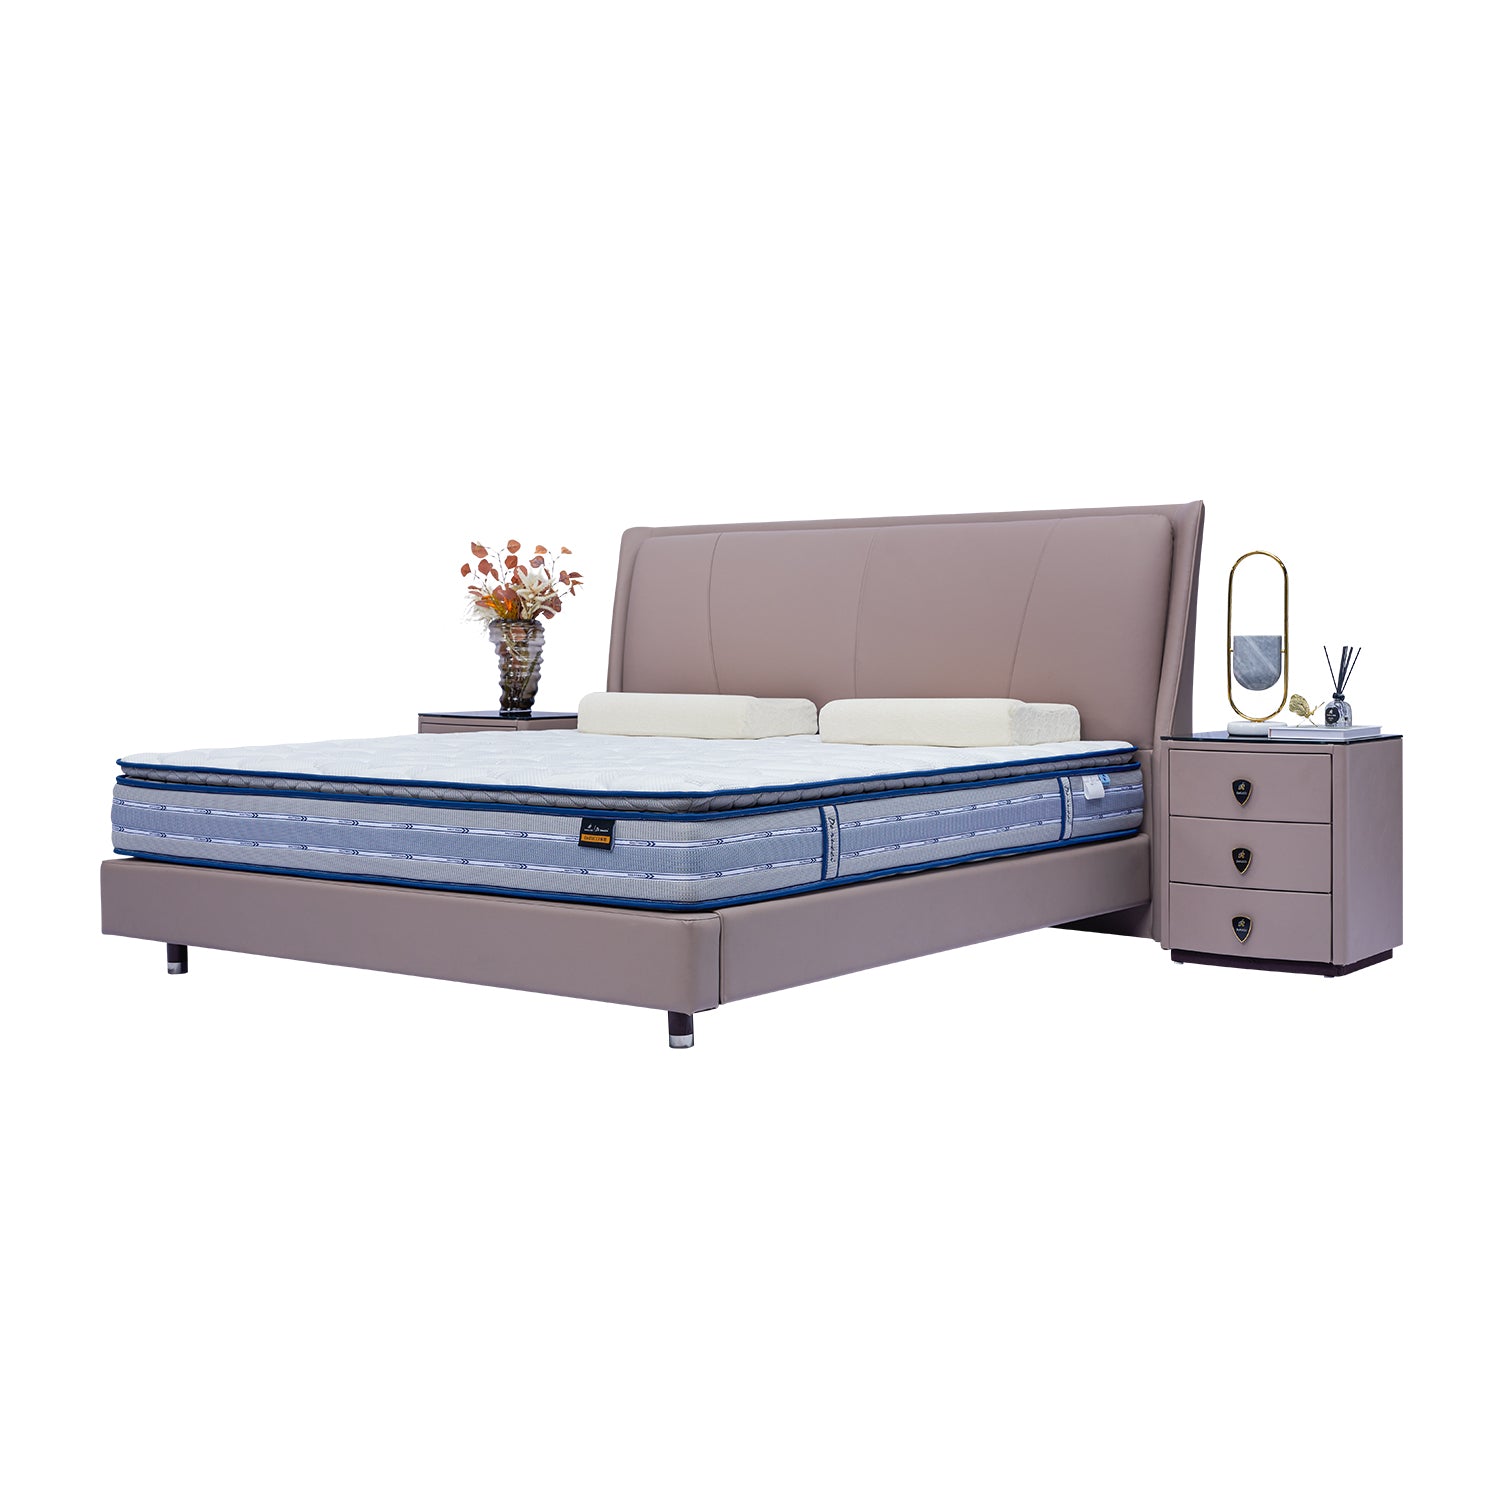 DeRUCCI Bed Frame BOC1 - 018 with beige upholstered headboard, blue mattress, and matching bedside tables with decorative items including a vase with dried flowers and a reed diffuser.